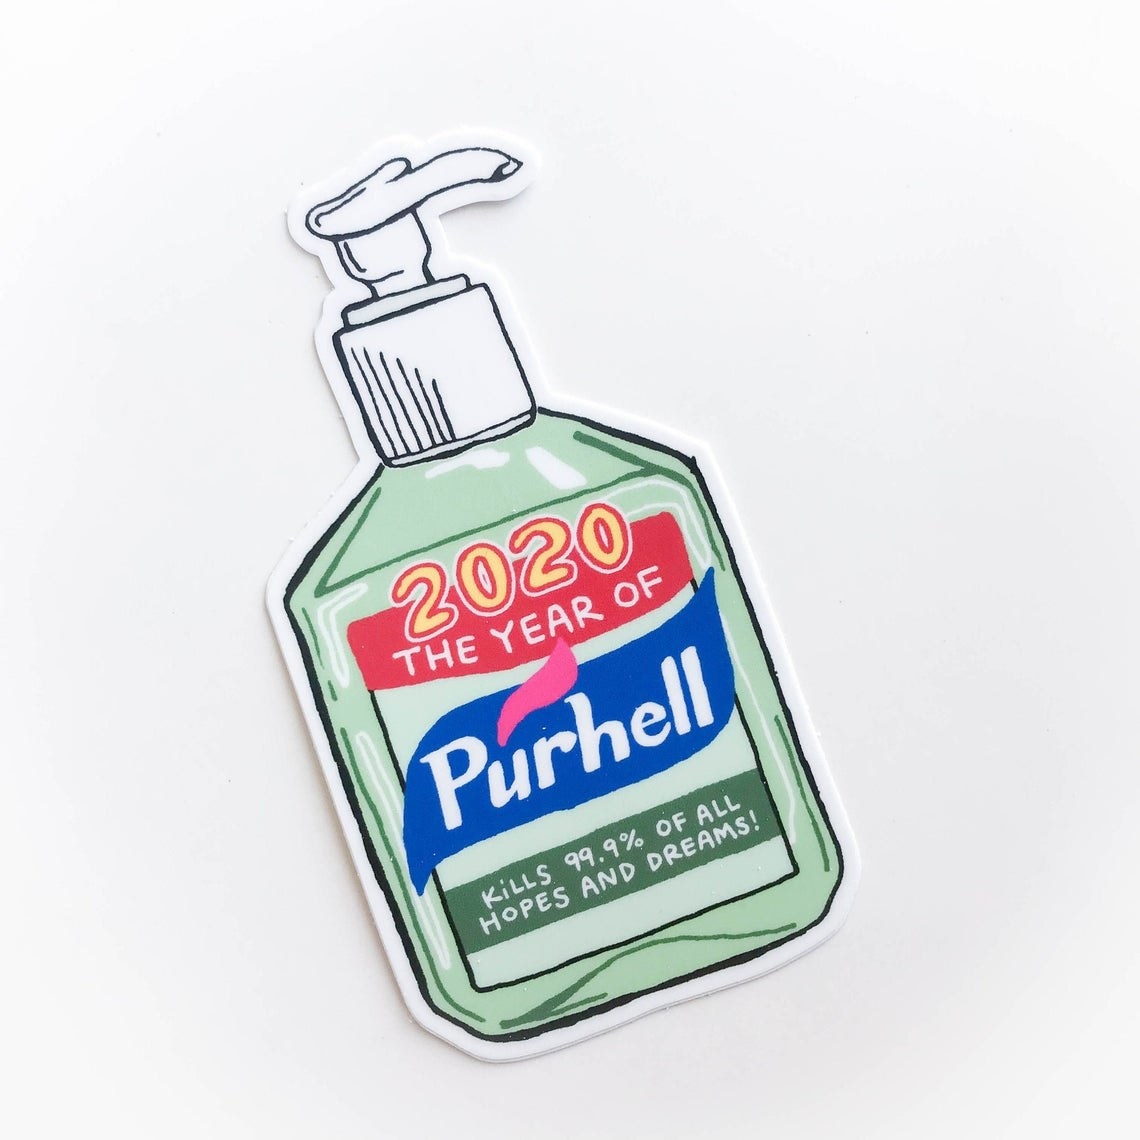 The vinyl sticker which resembles a bottle of hand sanitizer that reads &quot;2020 The Year of Purhell. Kills 99.9% of all hopes and dreams!&quot;